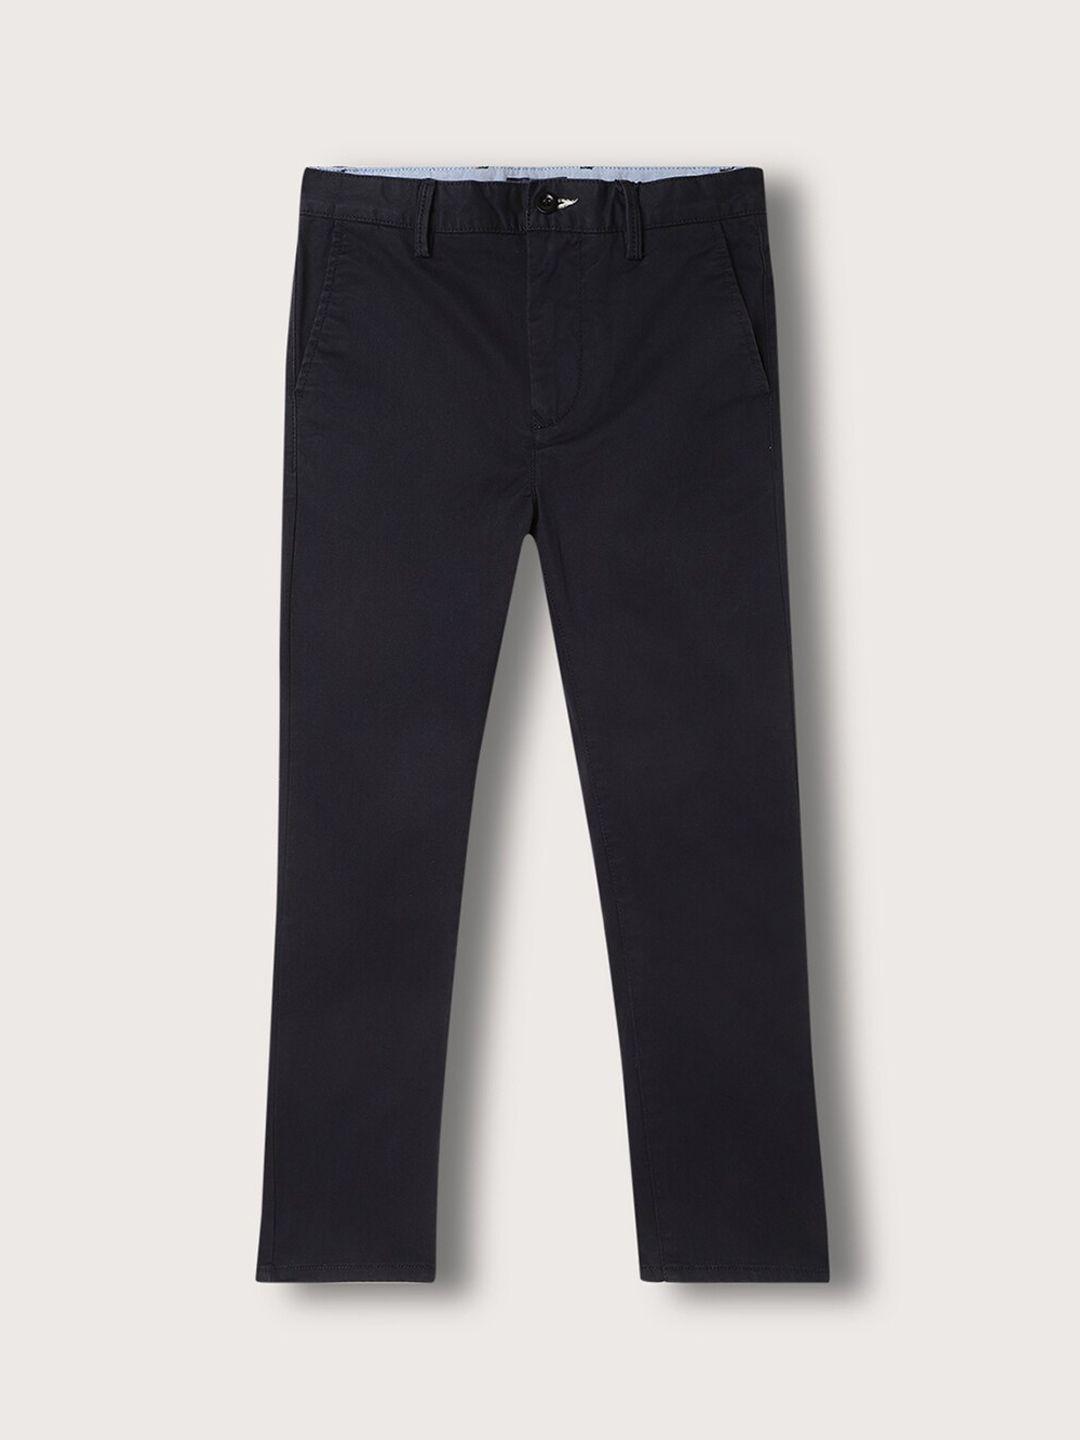 gant-boys-mid-rise-cotton-chinos-trousers